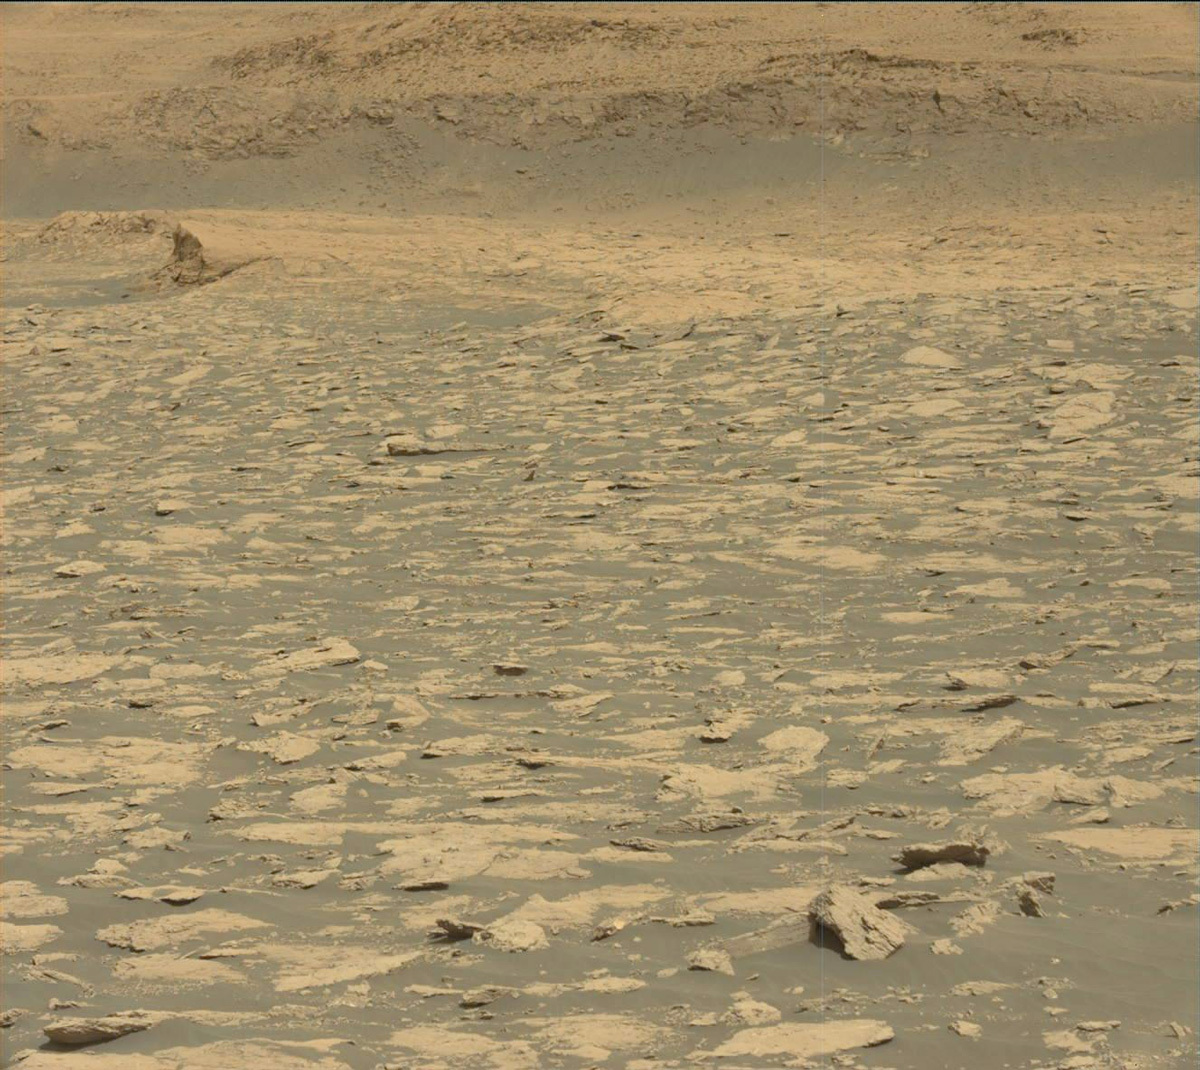 This image was taken by Mast Camera (Mastcam) onboard NASA's Mars rover Curiosity on Sol 3025. Credit: NASA/JPL-Caltech/MSSS. Download image ›